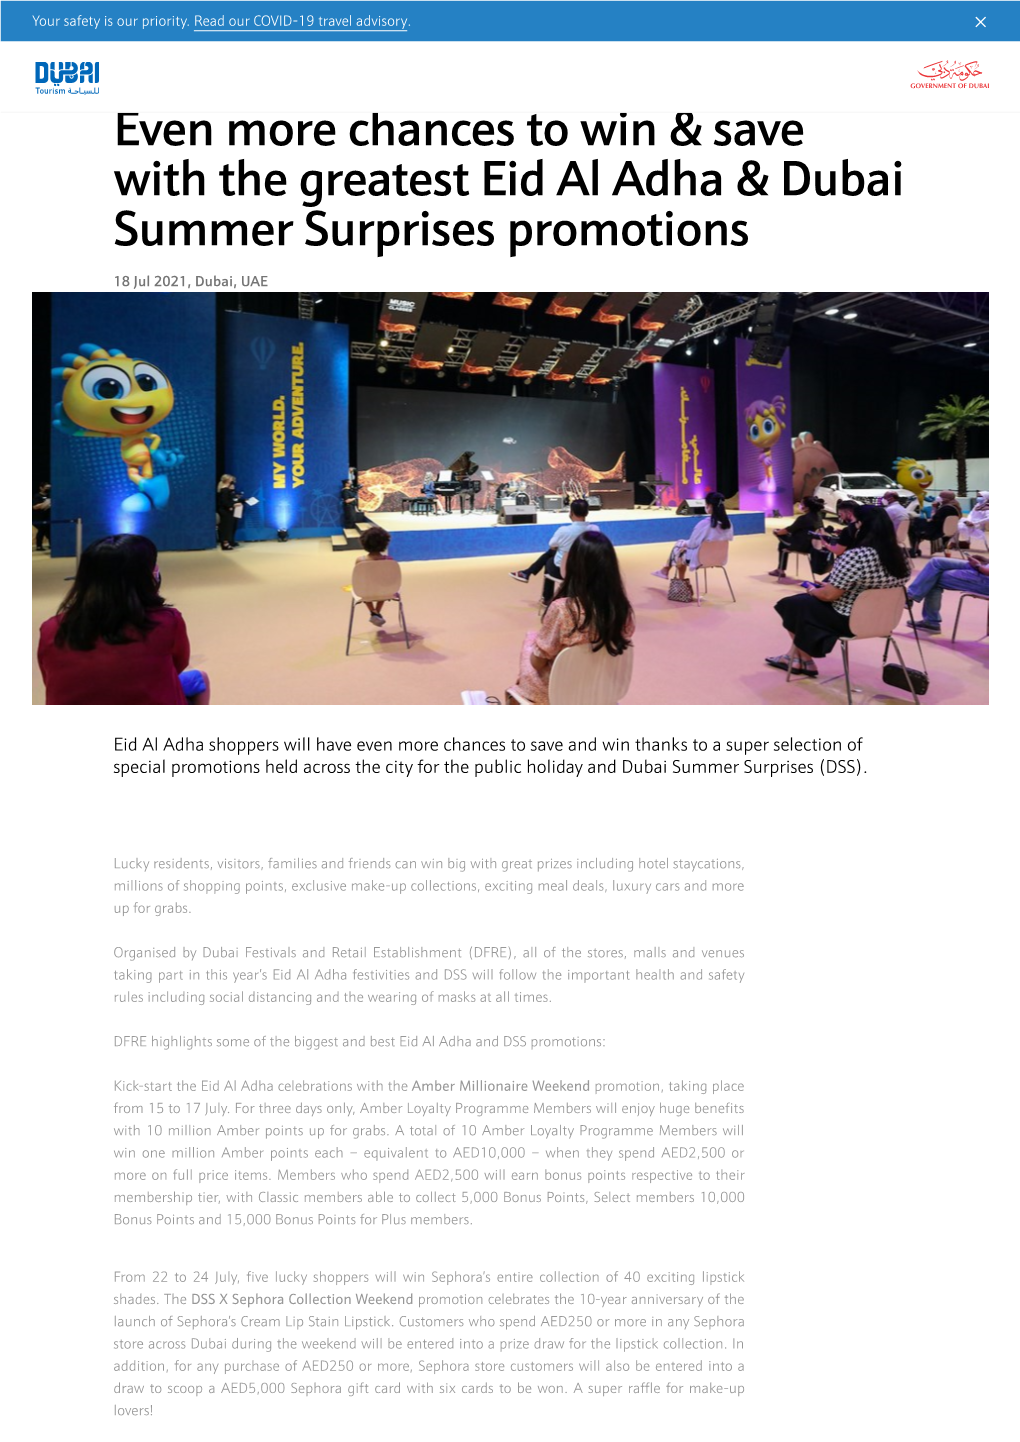 Even More Chances to Win & Save with the Greatest Eid Al Adha & Dubai Summer Surprises Promotions!